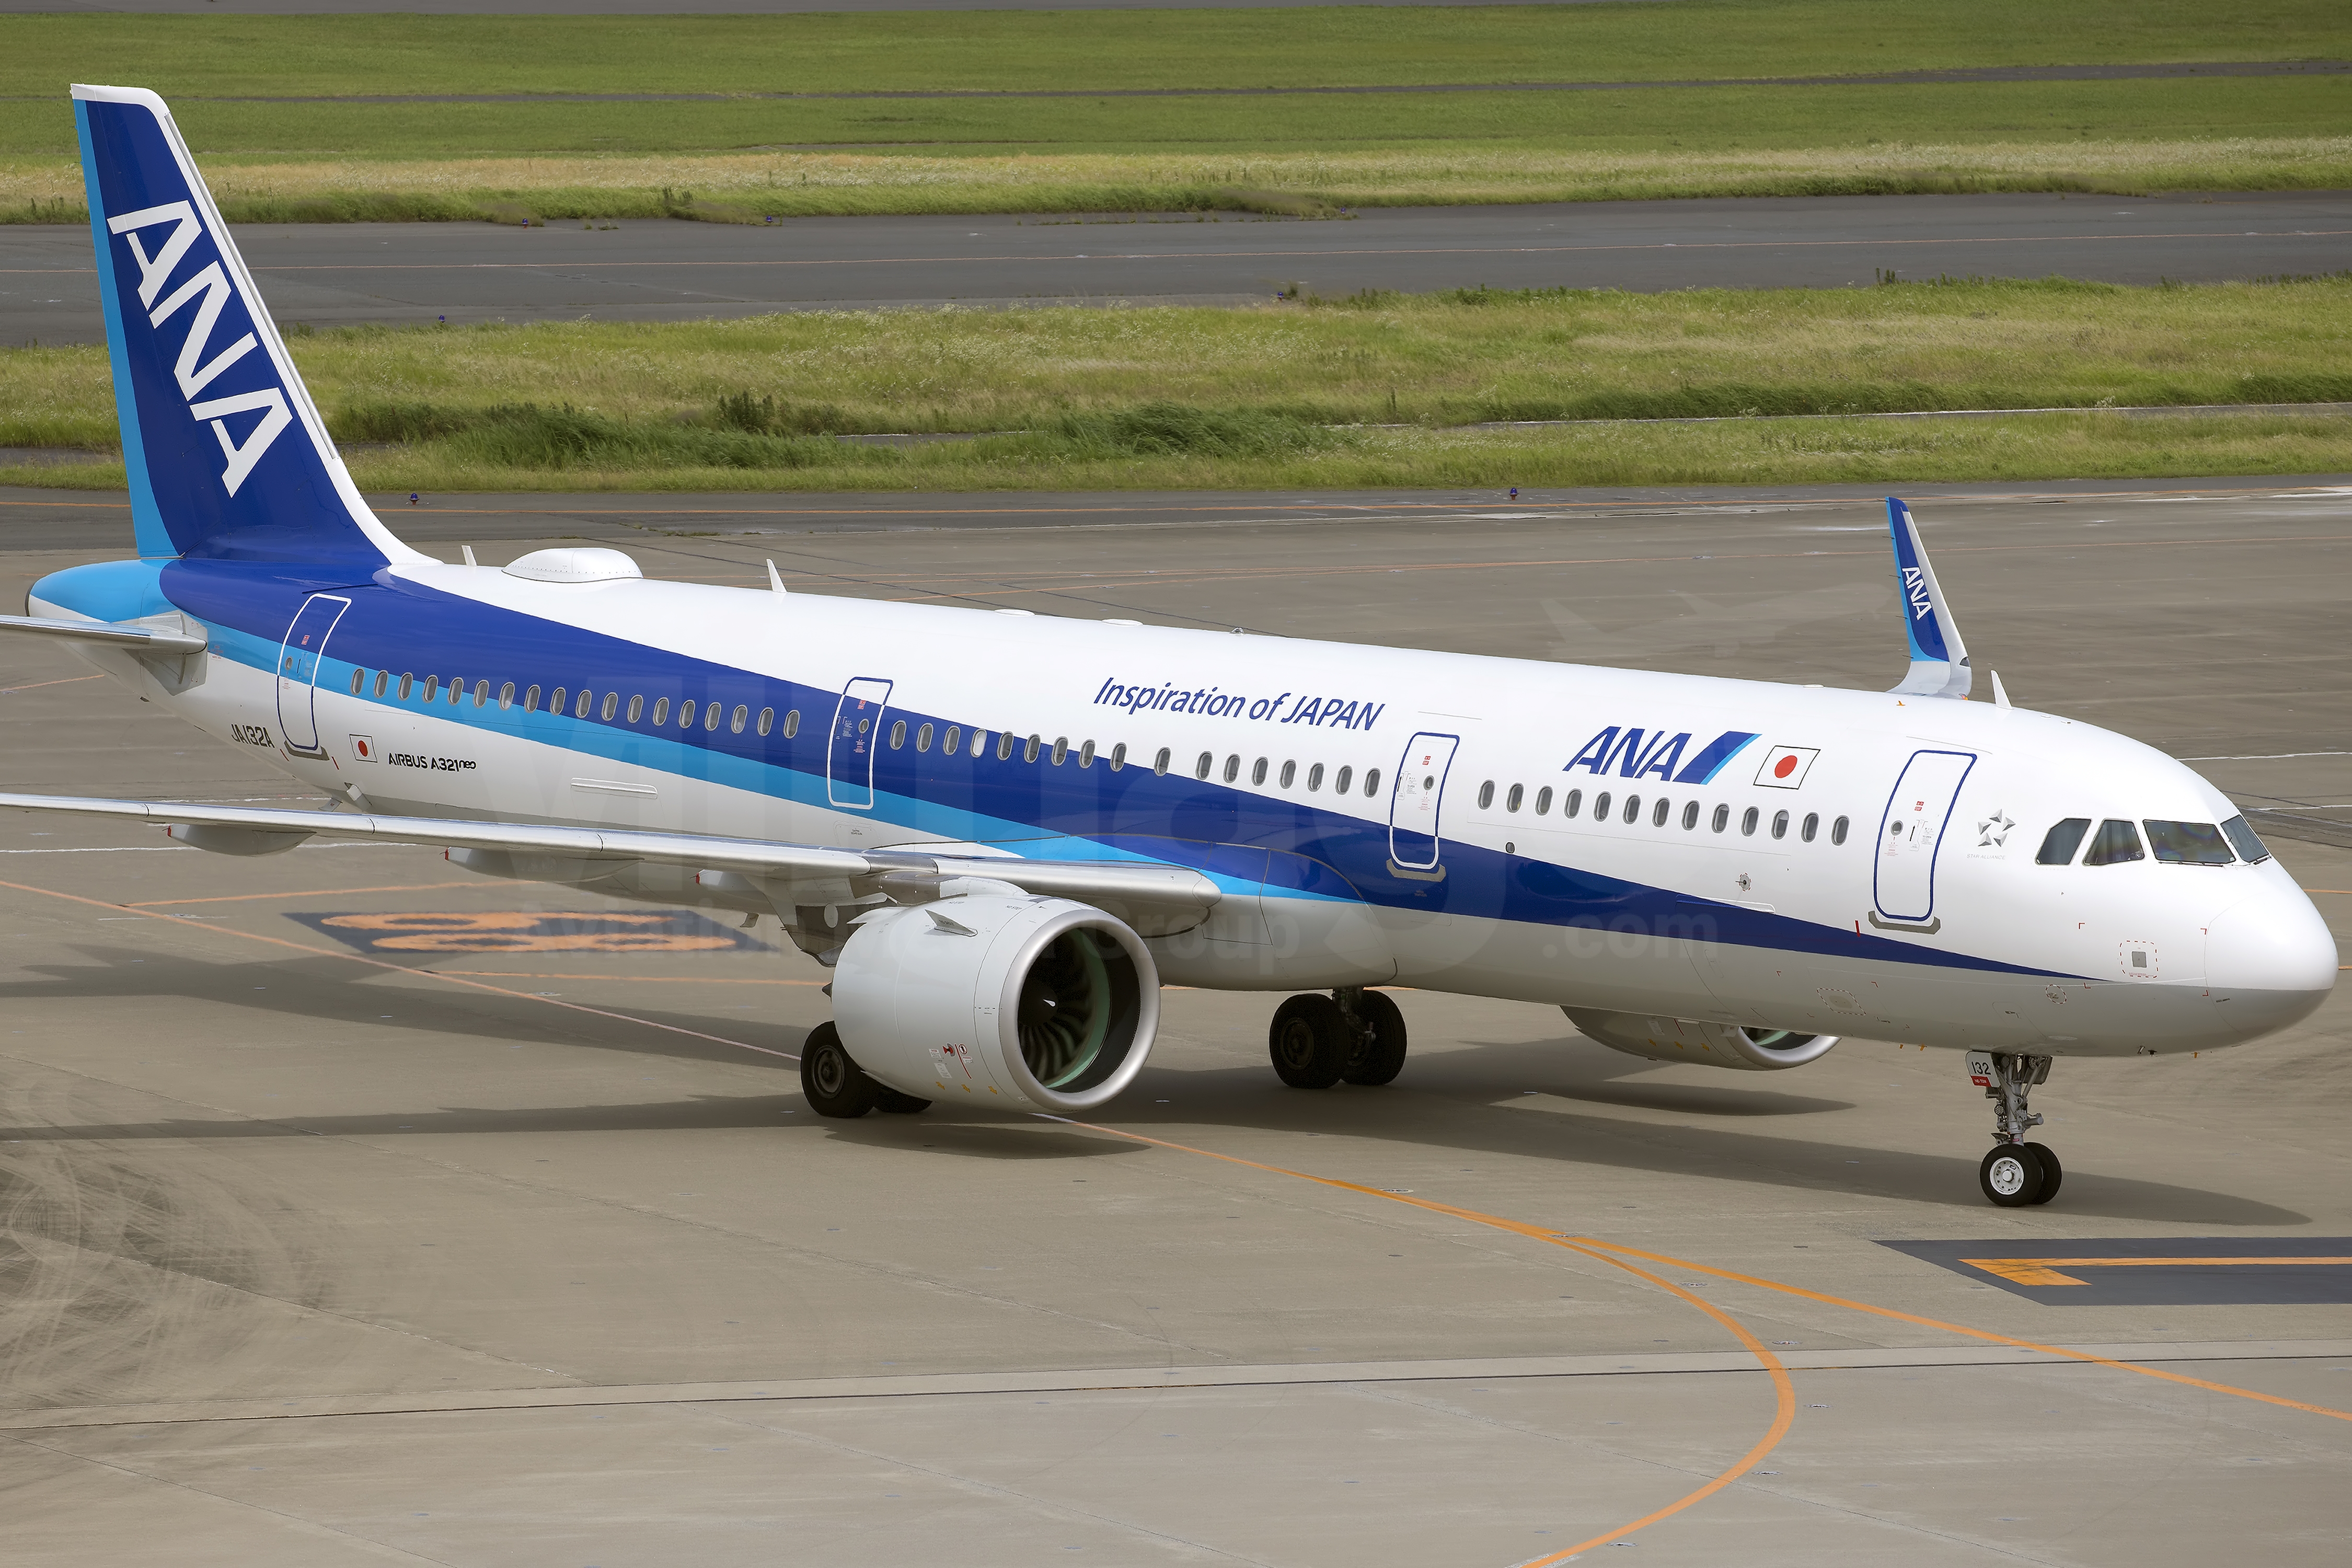 Ana All Nippon Airways Airbus A321 272n Ja132a V1images Aviation Media